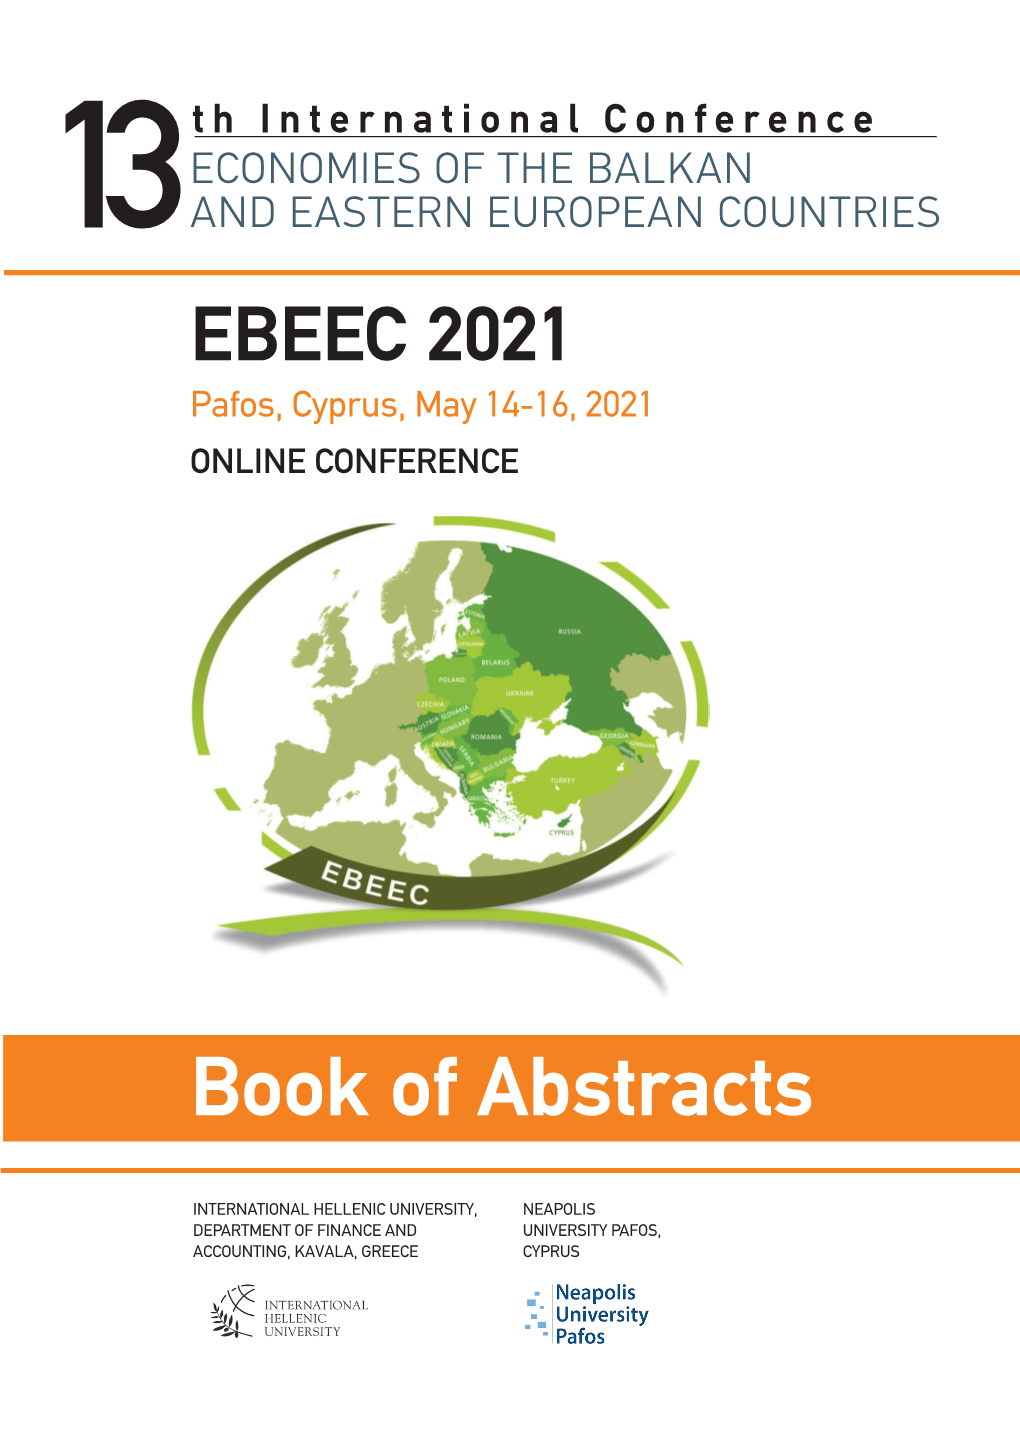 Abstracts of the EBEEC